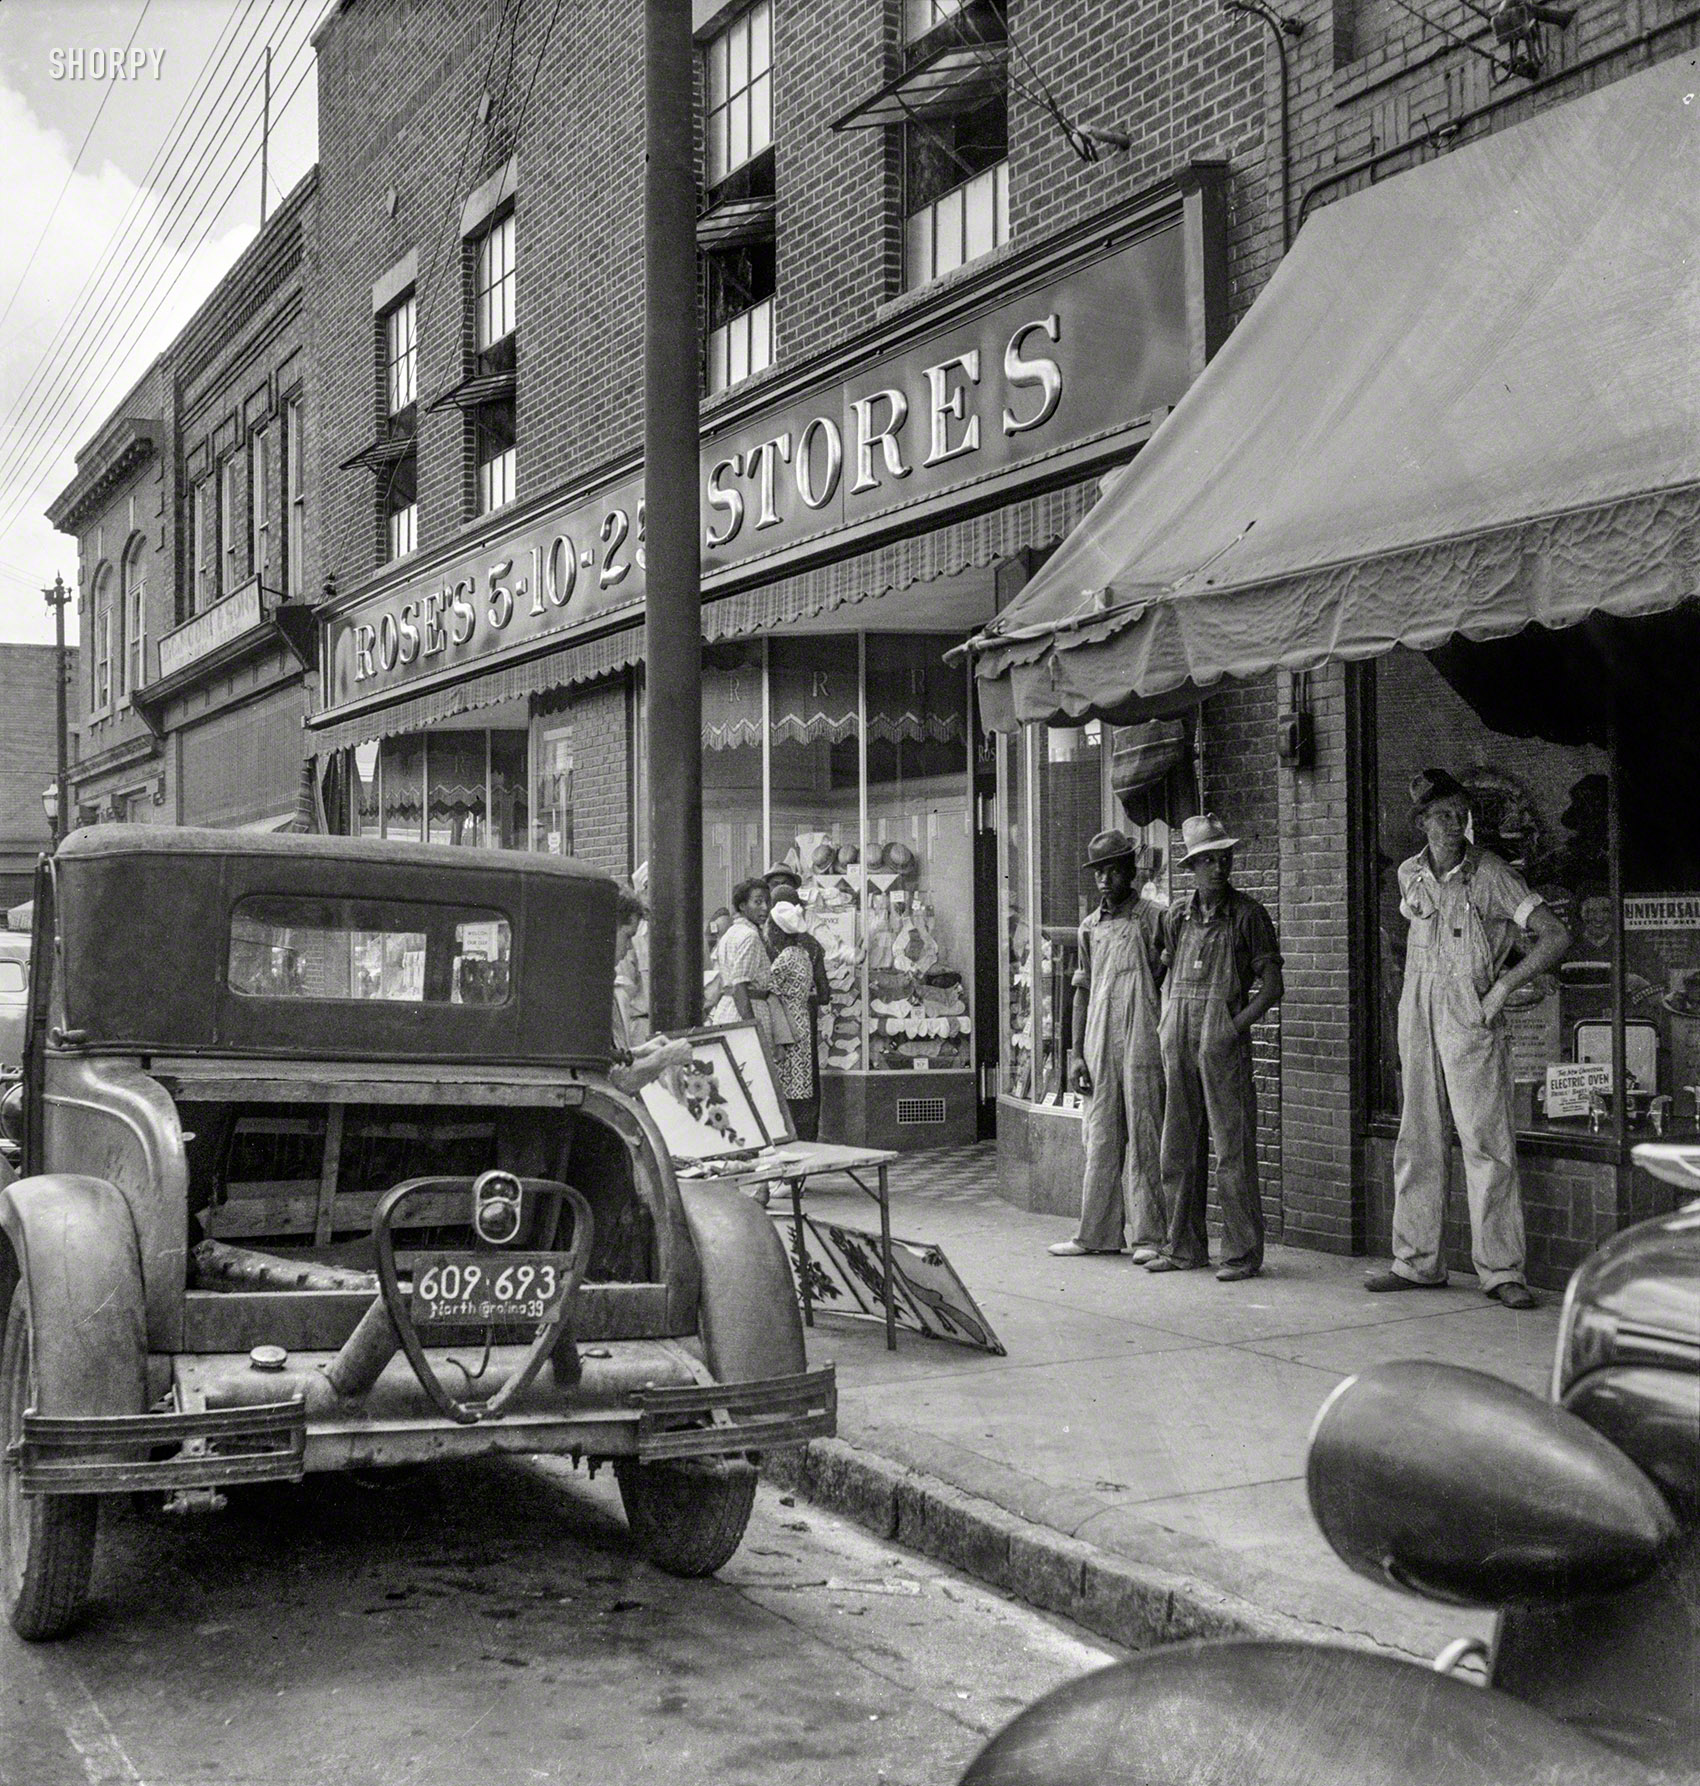 July 1939. "Appliqued embroideries for sale on street in front of ten cent store. Saturday afternoon. Siler City, North Carolina." Medium format negative by Dorothea Lange for the Farm Security Administration. View full size.